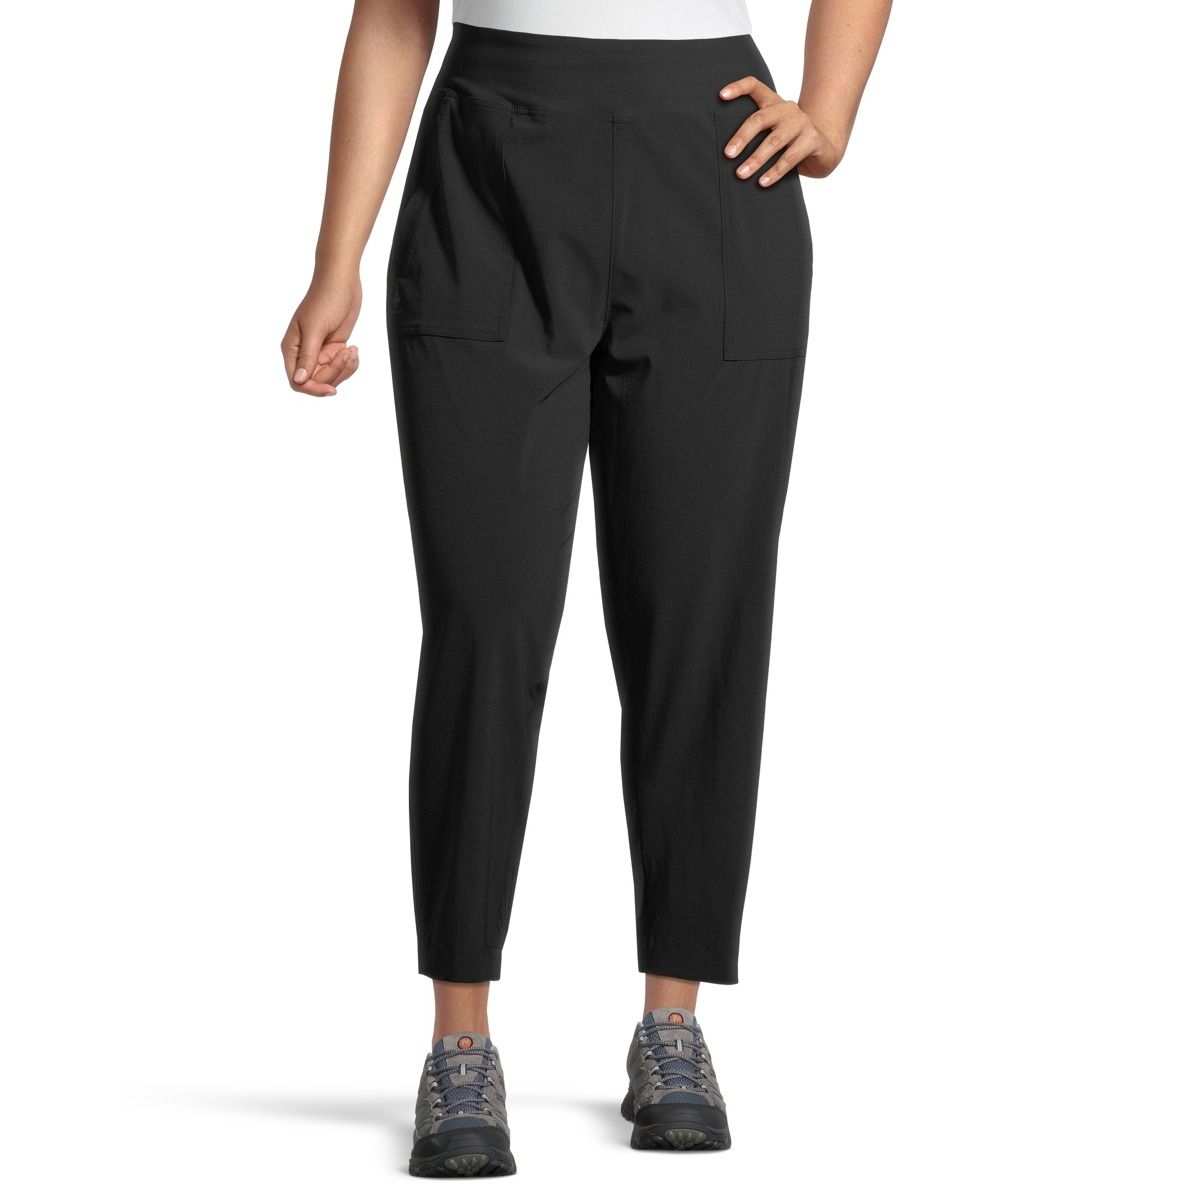 https://media-www.sportchek.ca/product/div-03-softgoods/dpt-72-casual-clothing/sdpt-02-womens/333595805/woods-w-es-kitchener-commuter-2-0-pant-s22-black-f67a8e6a-5546-4daf-ae18-cdd692084aaa-jpgrendition.jpg